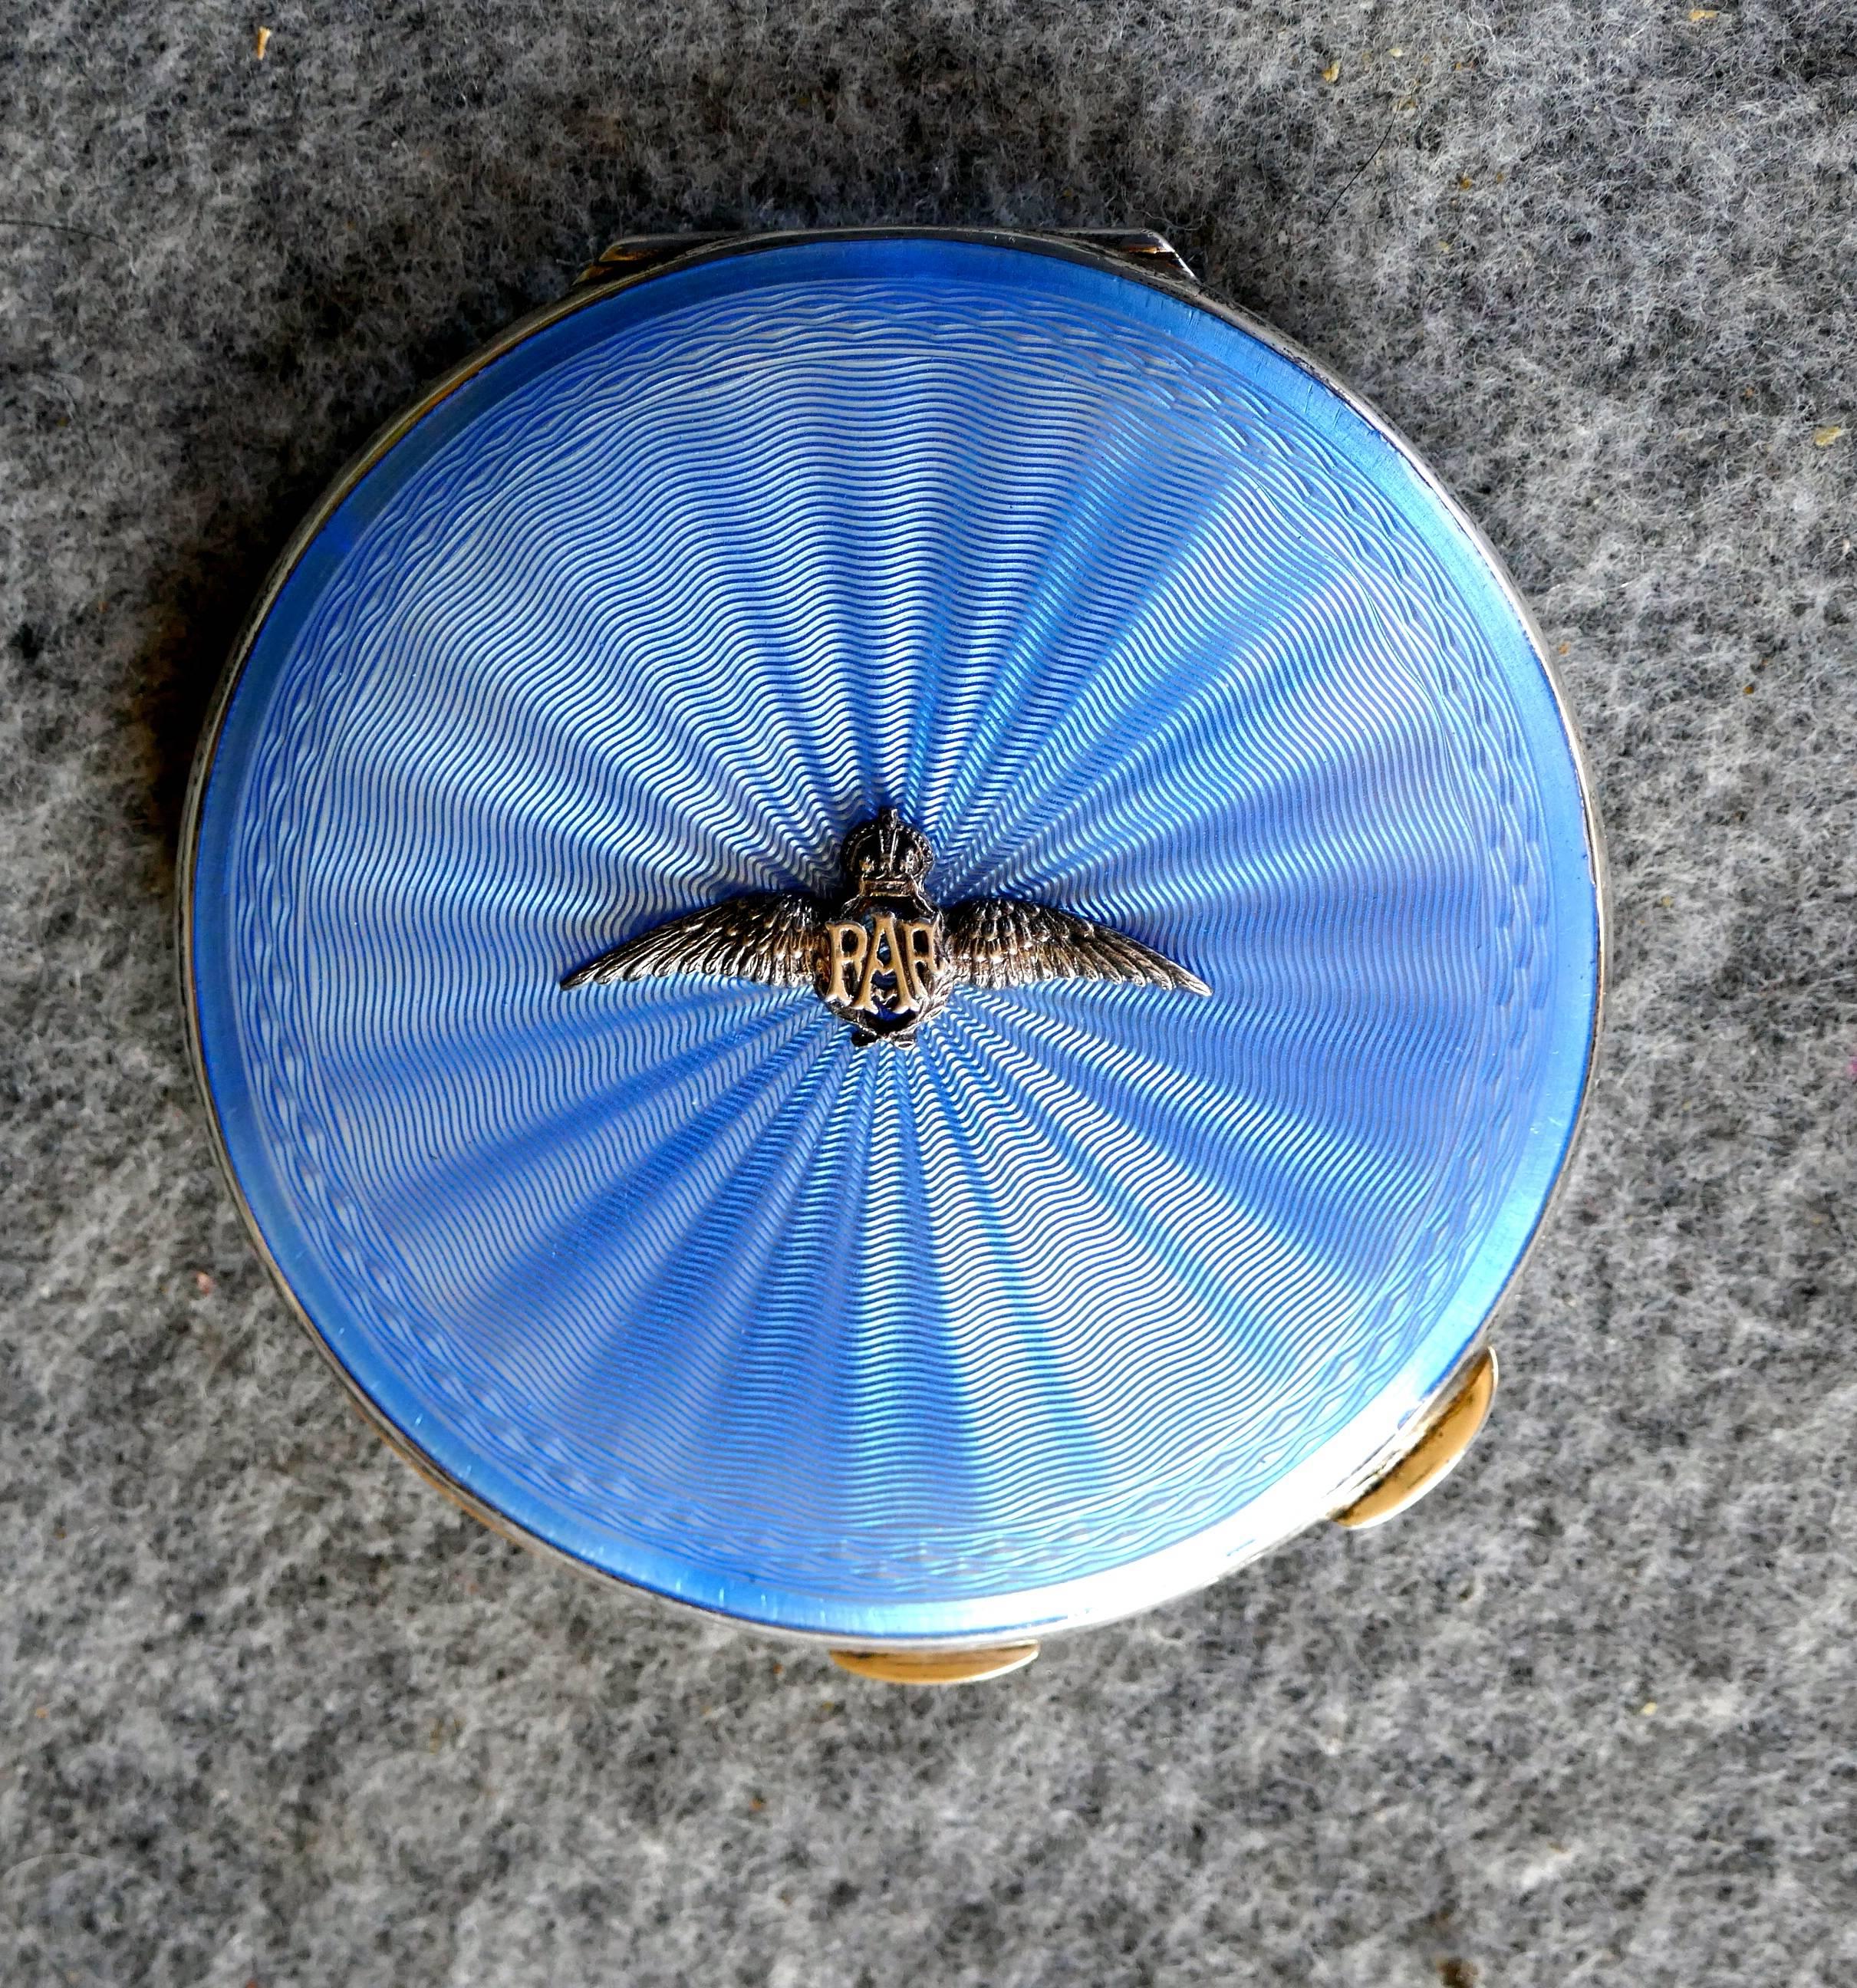 Charming RAF sterling silver and blue guilloche enamel compact case

An RAF Elizabeth II vintage sterling silver and guilloche enamel powder compact

This is a charming piece made in Birmingham 1952 by John William Barrett, the iridescent blue